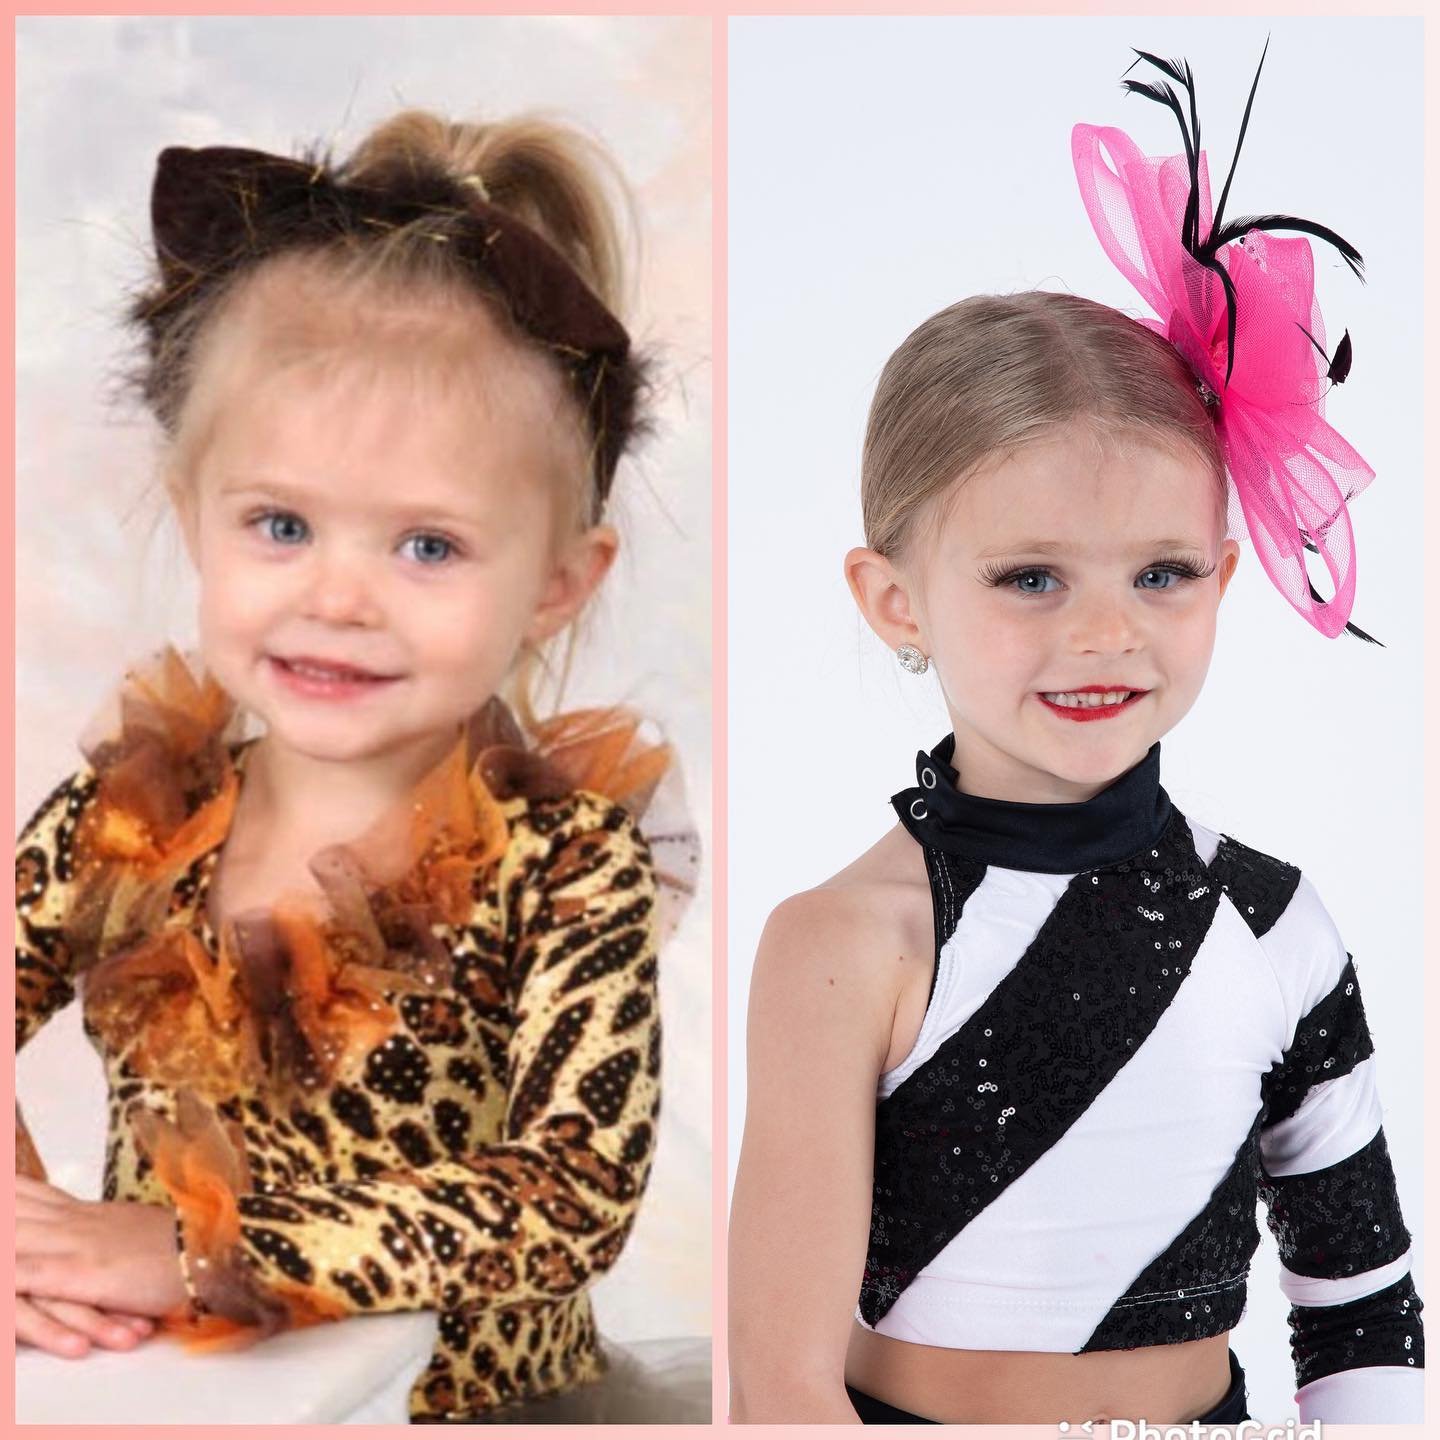 Can&rsquo;t leave out Belle!
On the left is 2021 Belle just before her 3rd birthday getting ready for her first recital
On the right is 2024 Belle just before her 6th birthday getting ready for her first Nationals
#tinydancer #dancemom #growingup #bl